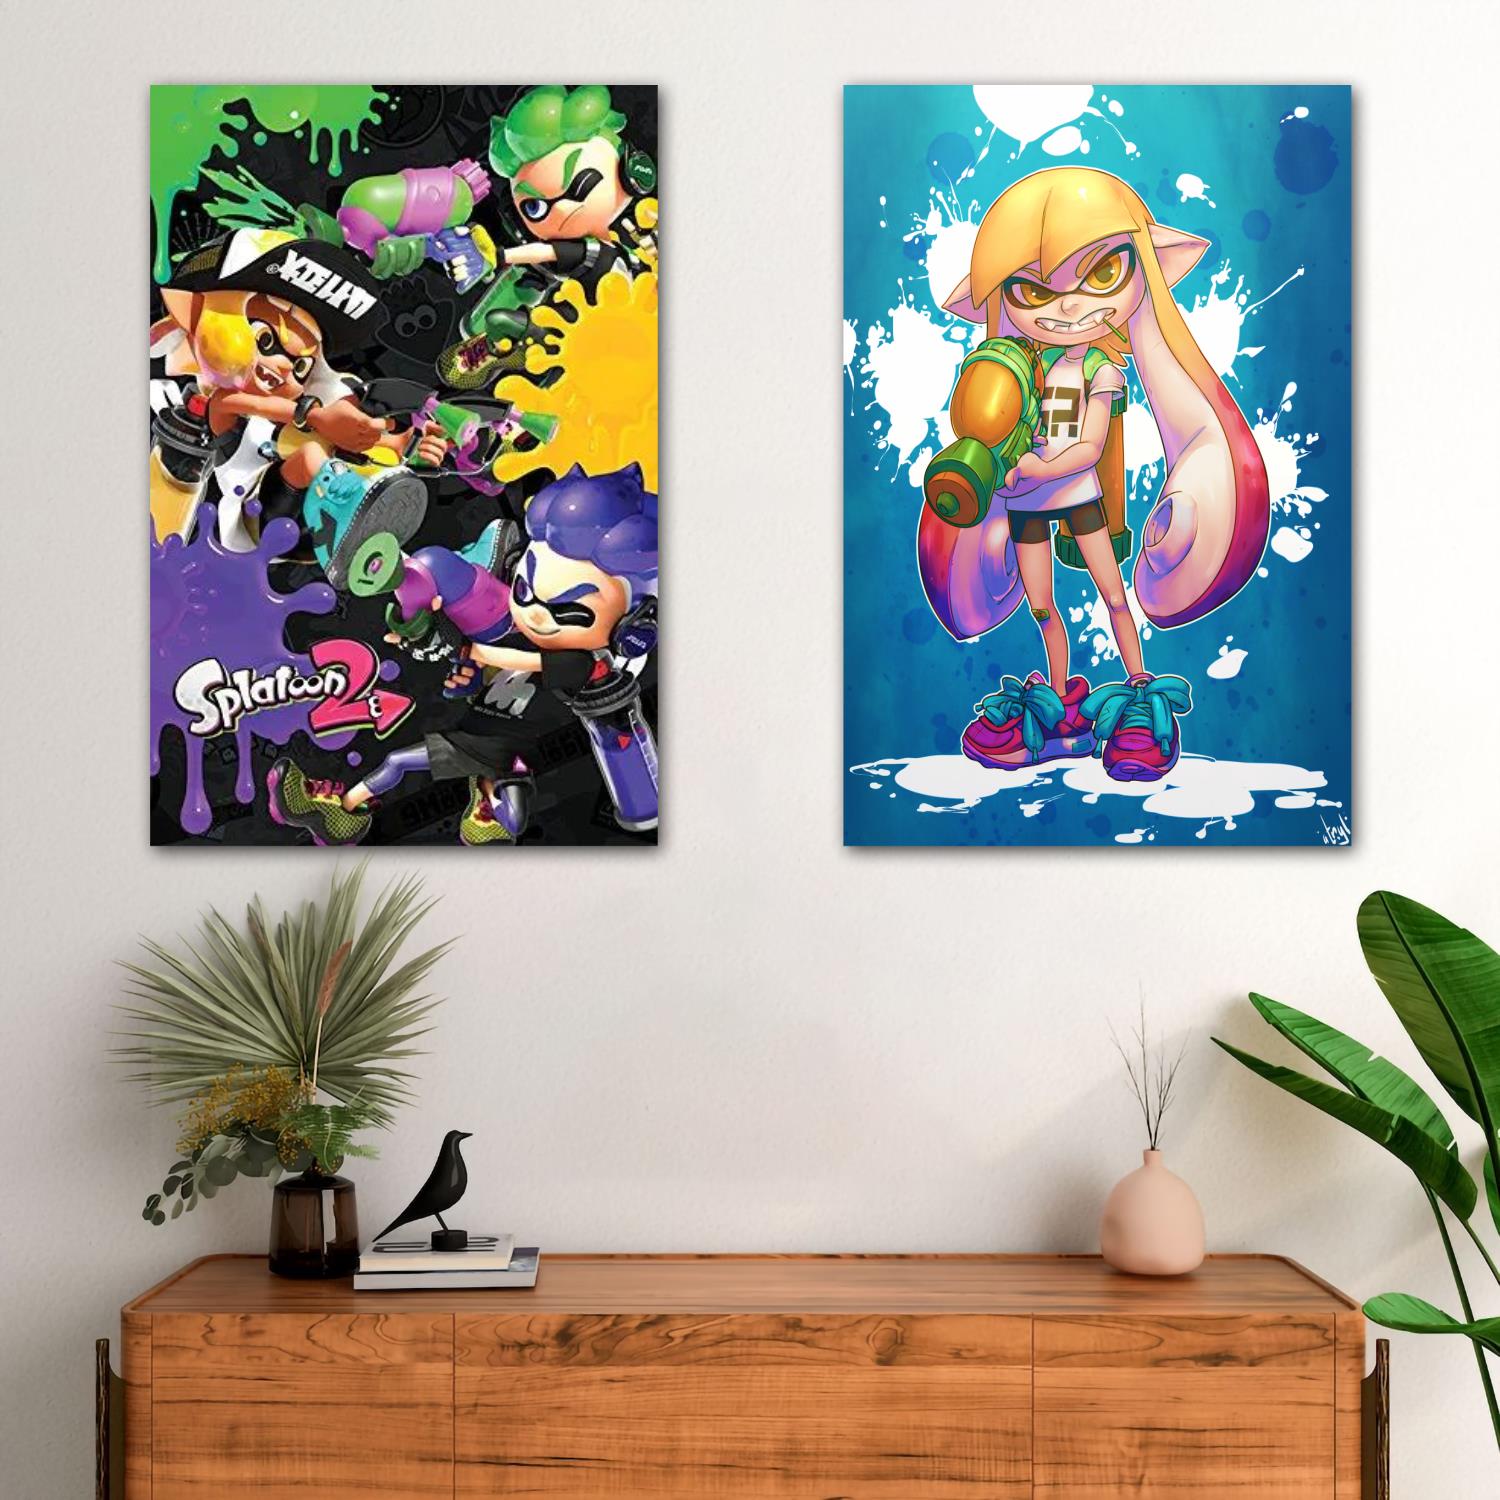 Splatoon video games Wall Art Canvas Posters Decoration Art 24x36 Poster Personalized Gift Modern Family bedroom - Splatoon Plush